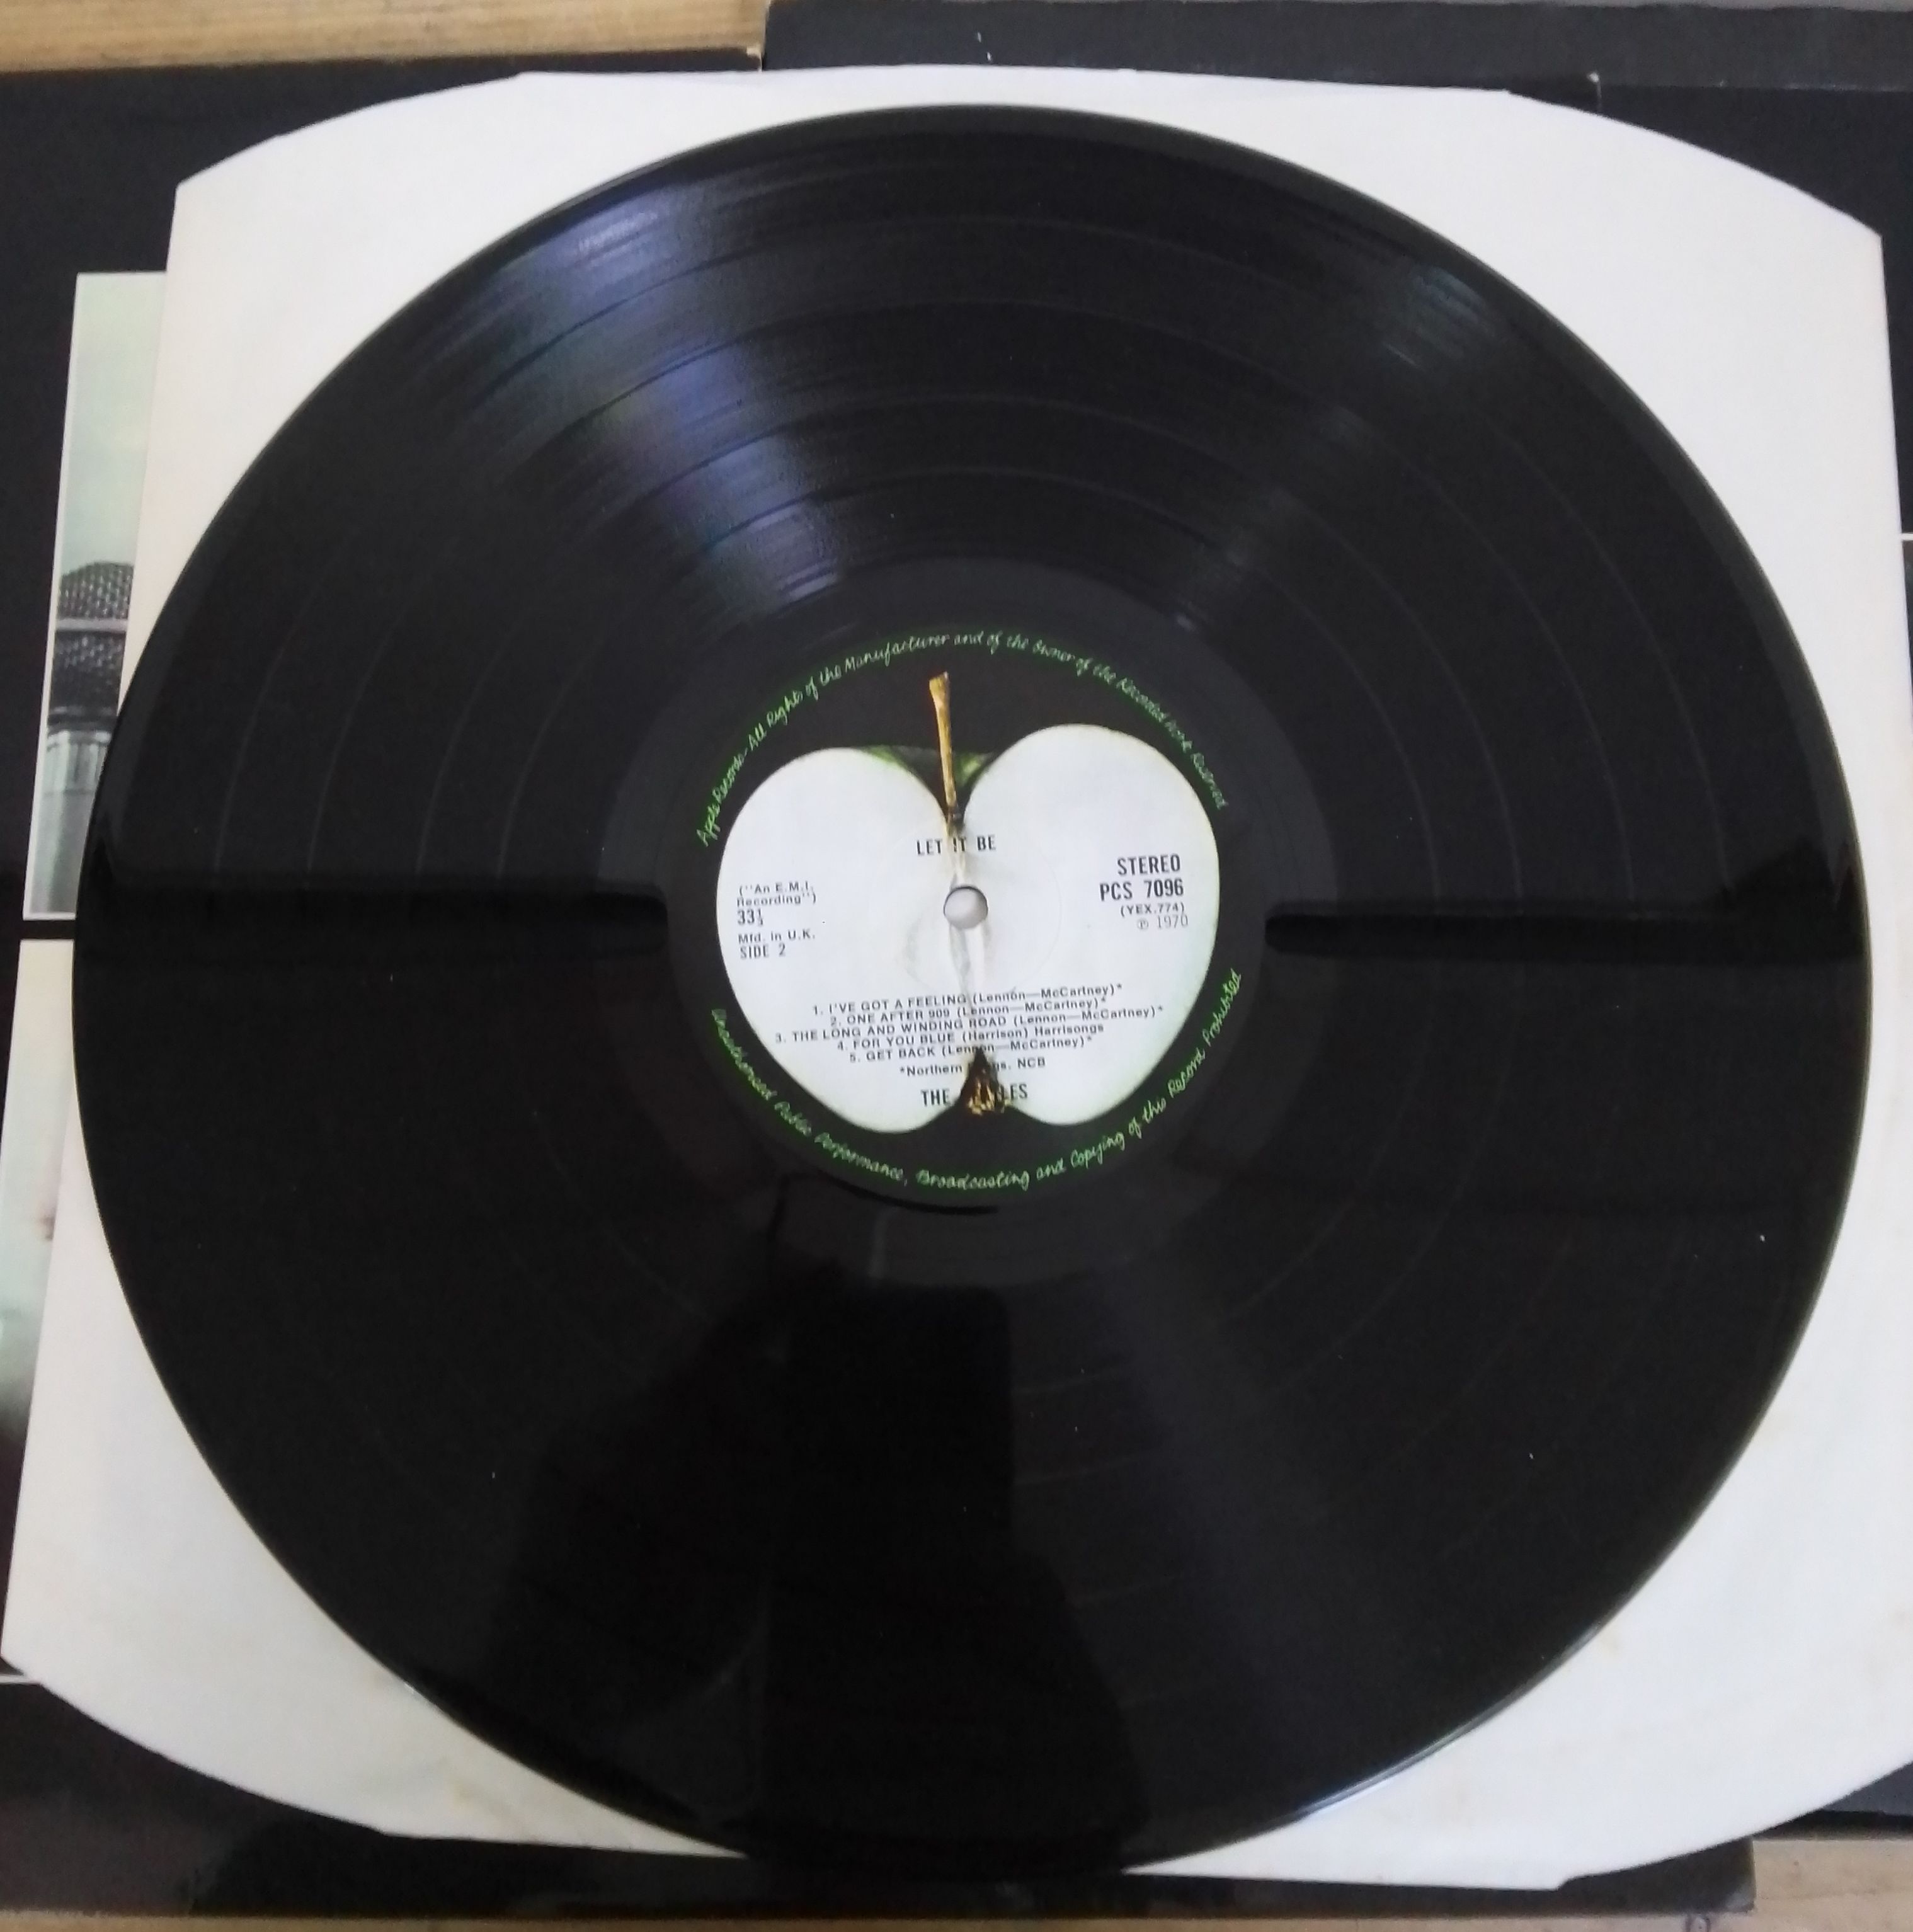 The Beatles - Let It Be, box set LP with booklet, Apple Records PXS 1 PCS 7096 - Image 4 of 4